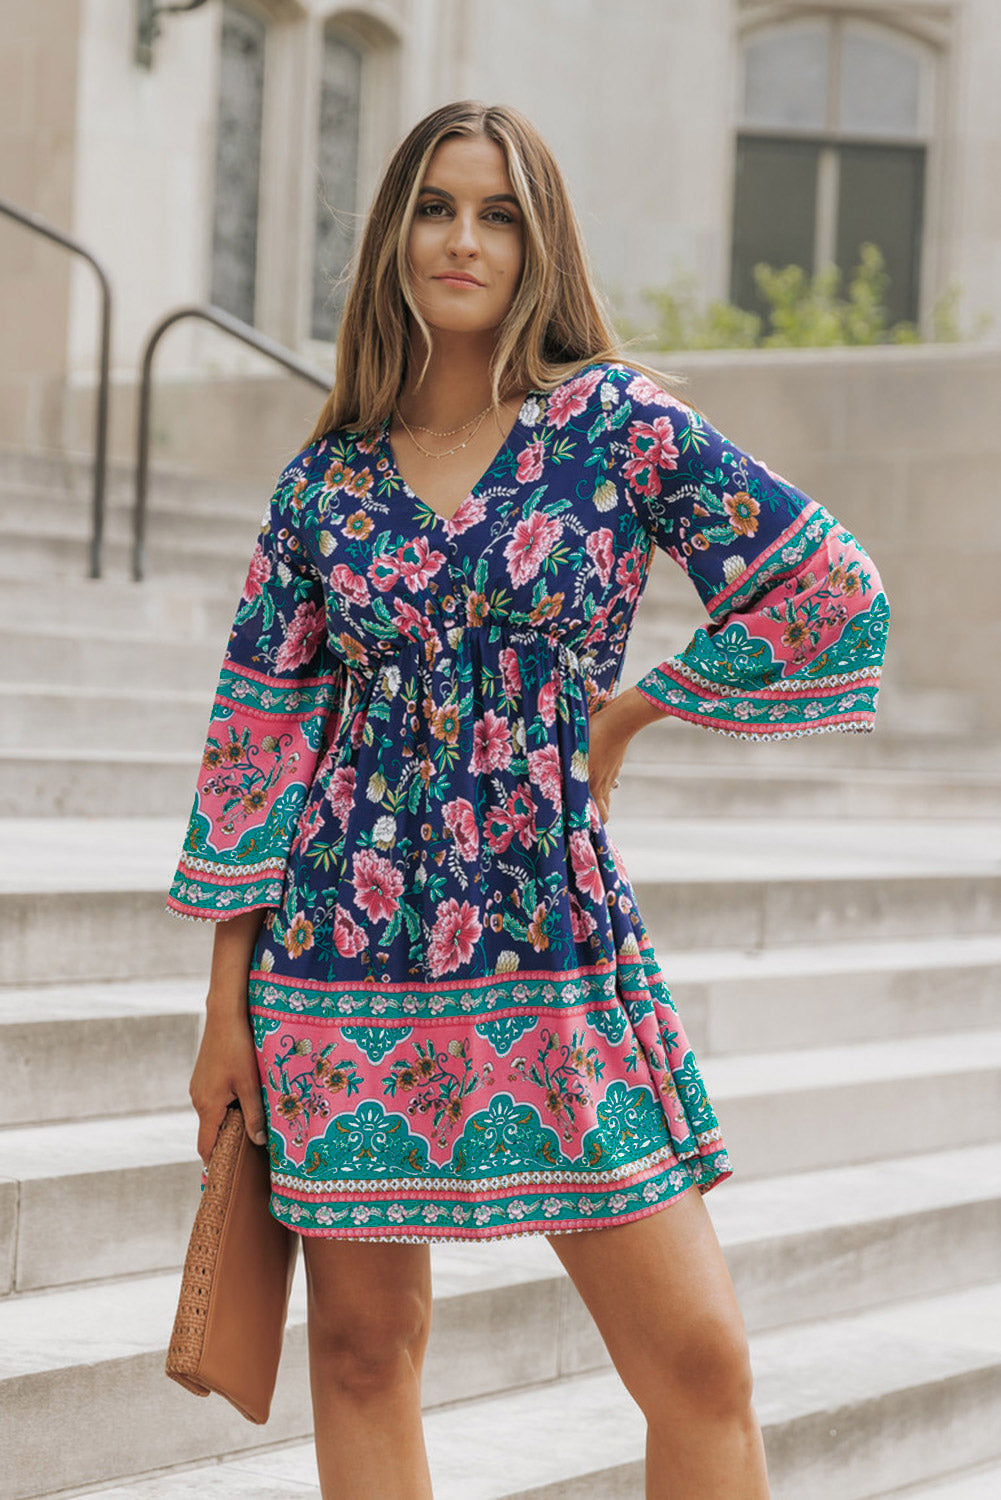 Easy-care boho chic garden dress in vibrant floral print - perfect for summer